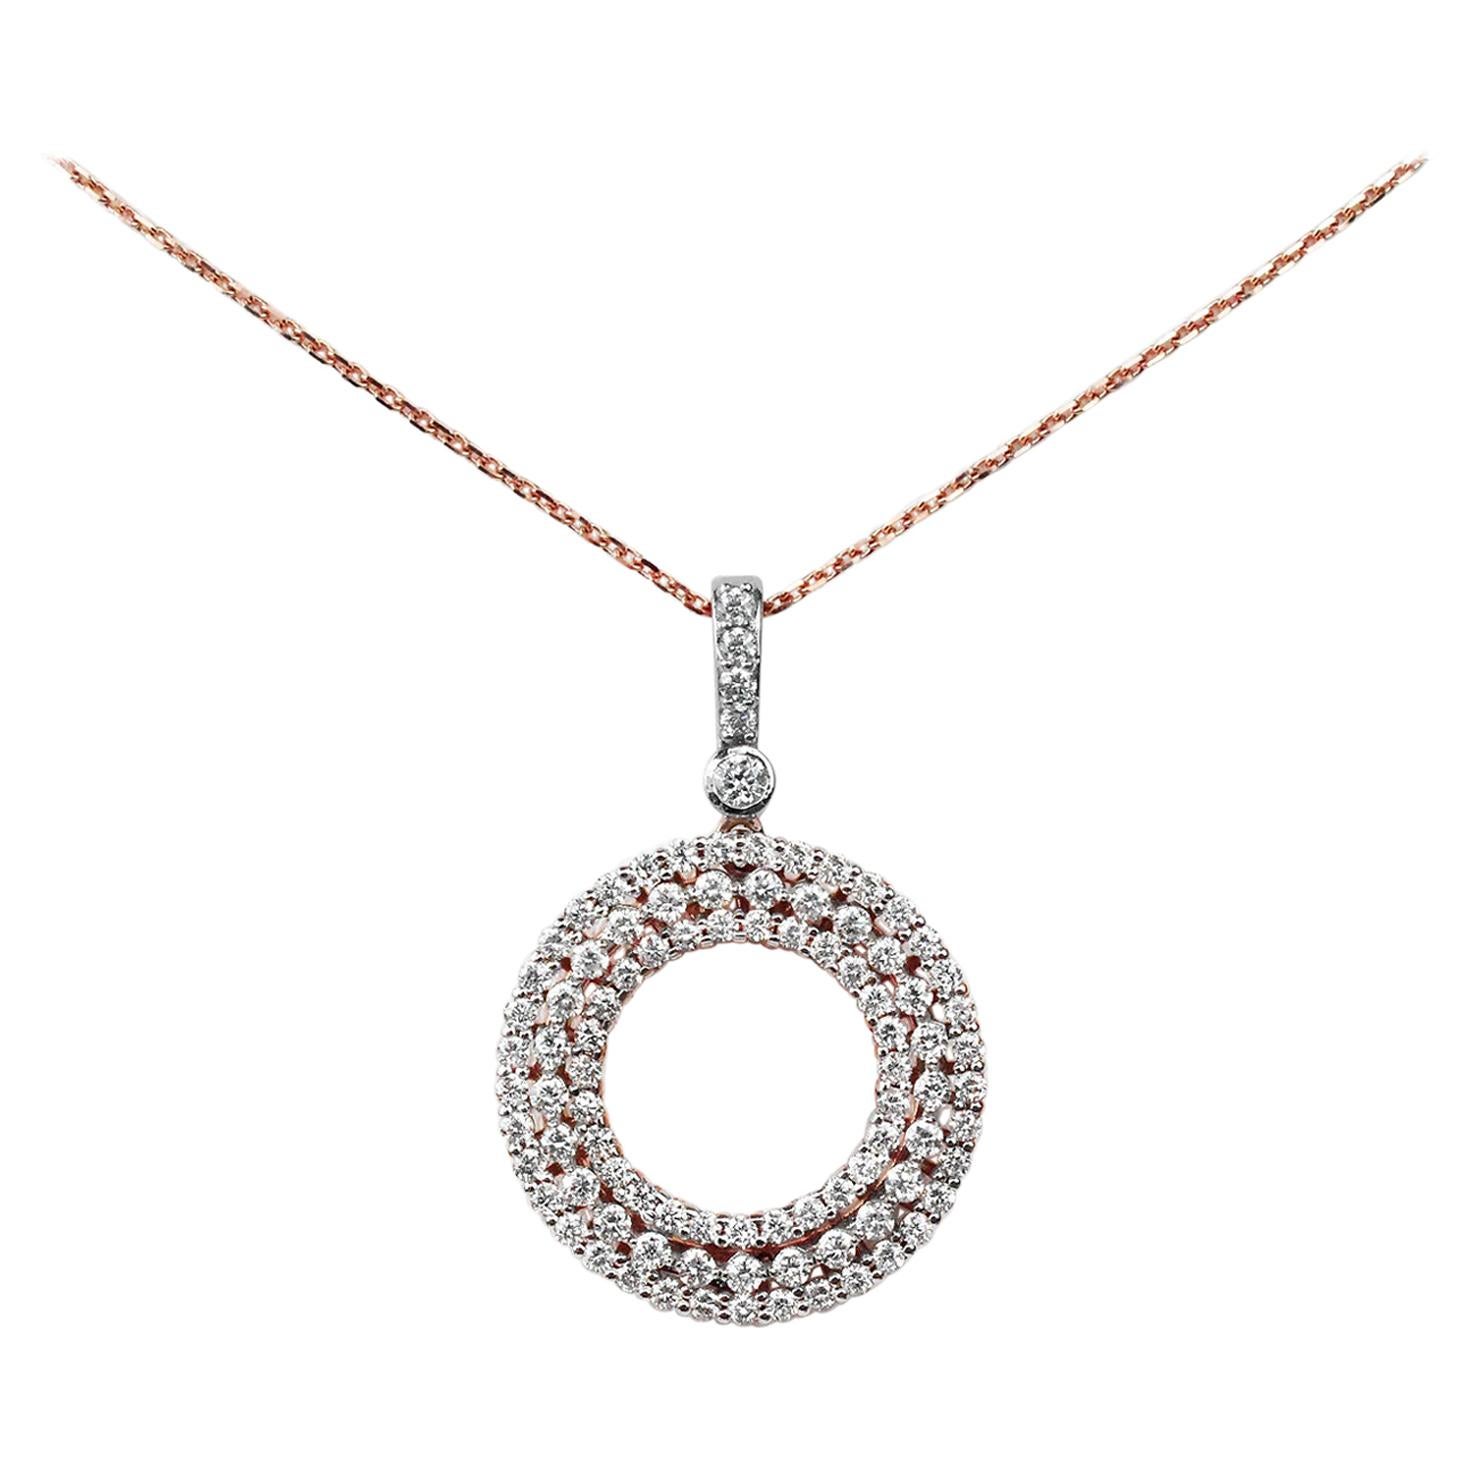 18Karat Gold Pendant Necklace Two-Tone White Gold Rose Gold Diamond Pave Circle Pendant Necklace
           This 18K solid 2 tone gold, rose/white gold circle pendant is made with spectacular round diamonds, clasped within a fine multi halo of pavé